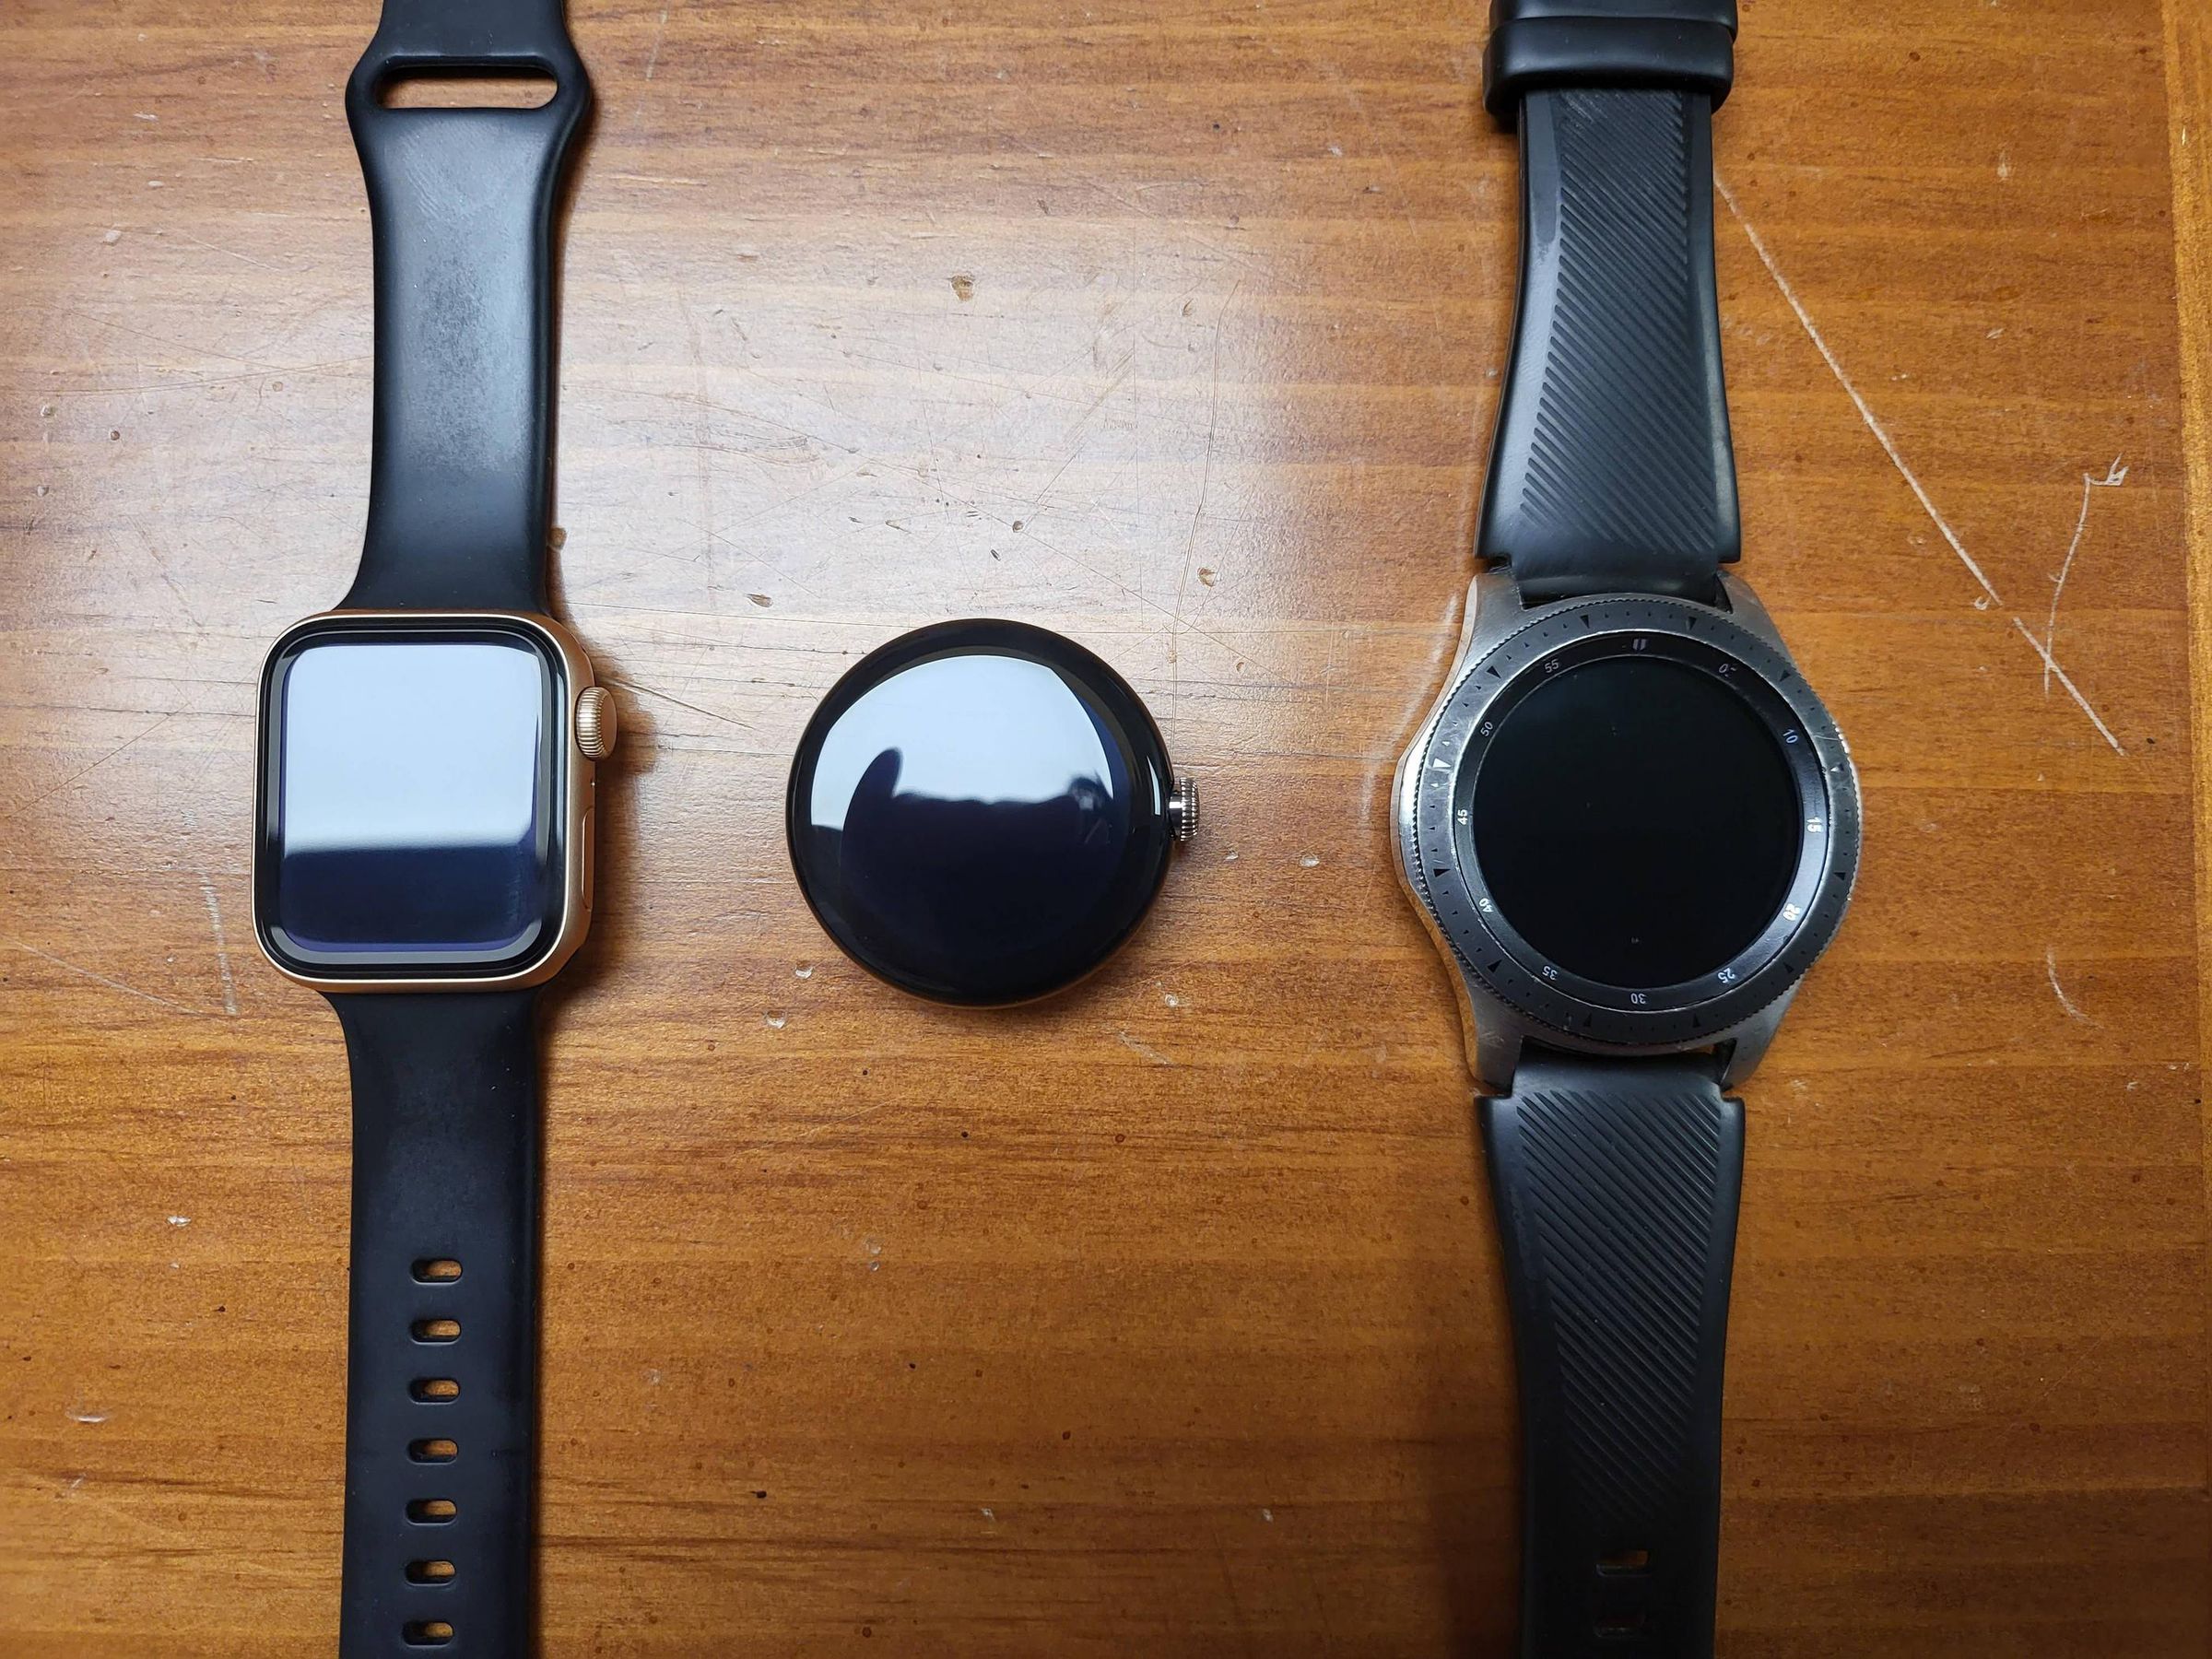 A leaked Pixel Watch prototype between a 40mm Apple Watch (left) and a 46mm Samsung Galaxy Watch.